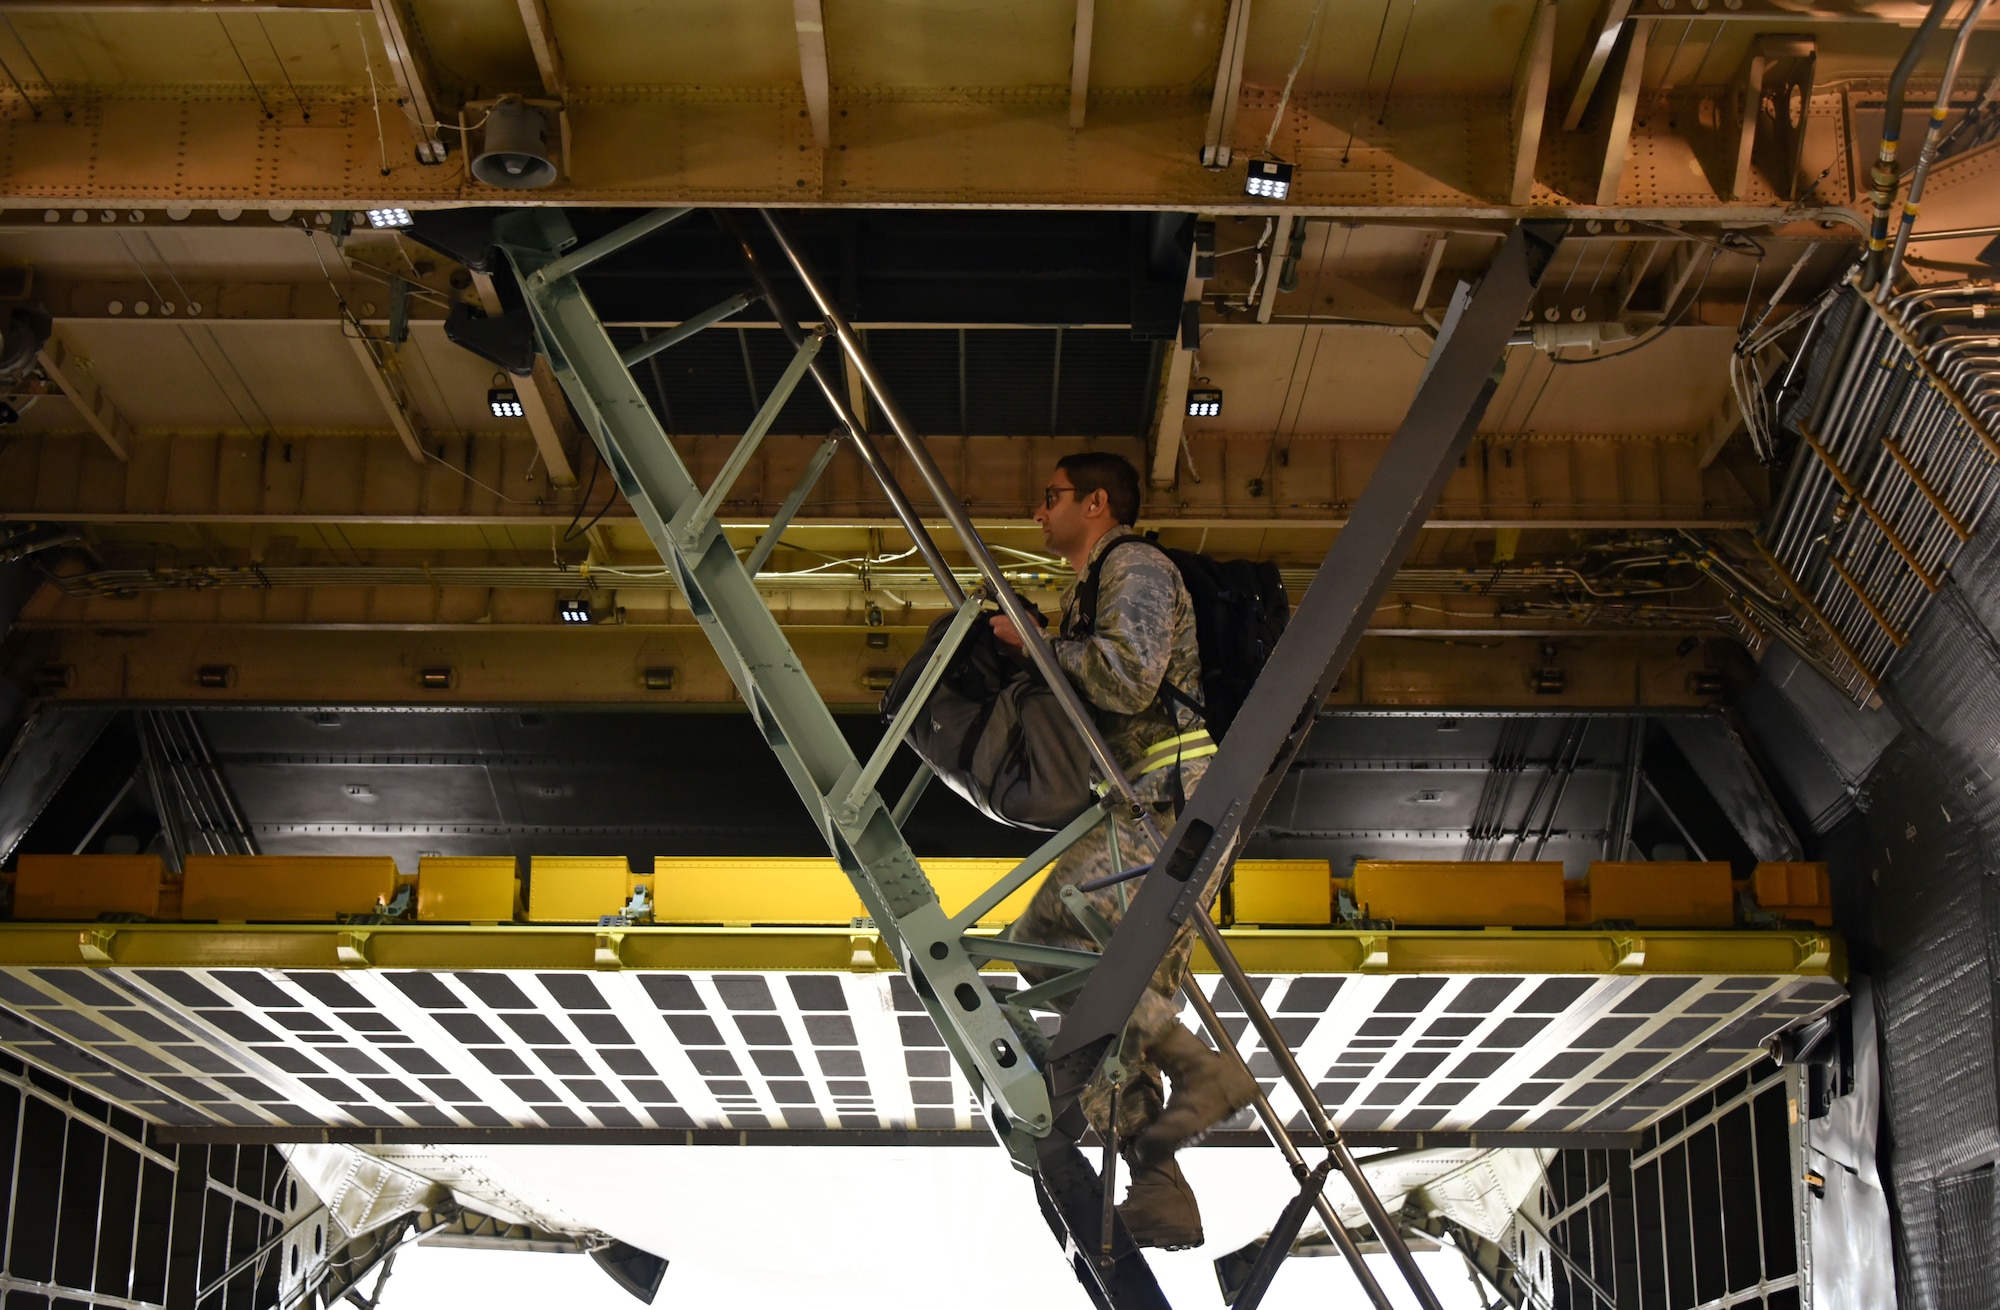 A deploying Airman from the 301st Fighter Wing Medical Squadron climbs stairs to the second level inside of a C-5 Super Galaxy at U.S. Naval Air Station Joint Reserve Base, Fort Worth, Texas on April 5, 2020. This deployment is part of a larger mobilization package of more than 120 doctors, nurses, and respiratory technicians Air Force Reserve units across the nation provided over the past 48 hours of COVID-19 response to take care of Americans. (U.S. Air Force photo by Tech. Sgt. Melissa Harvey)